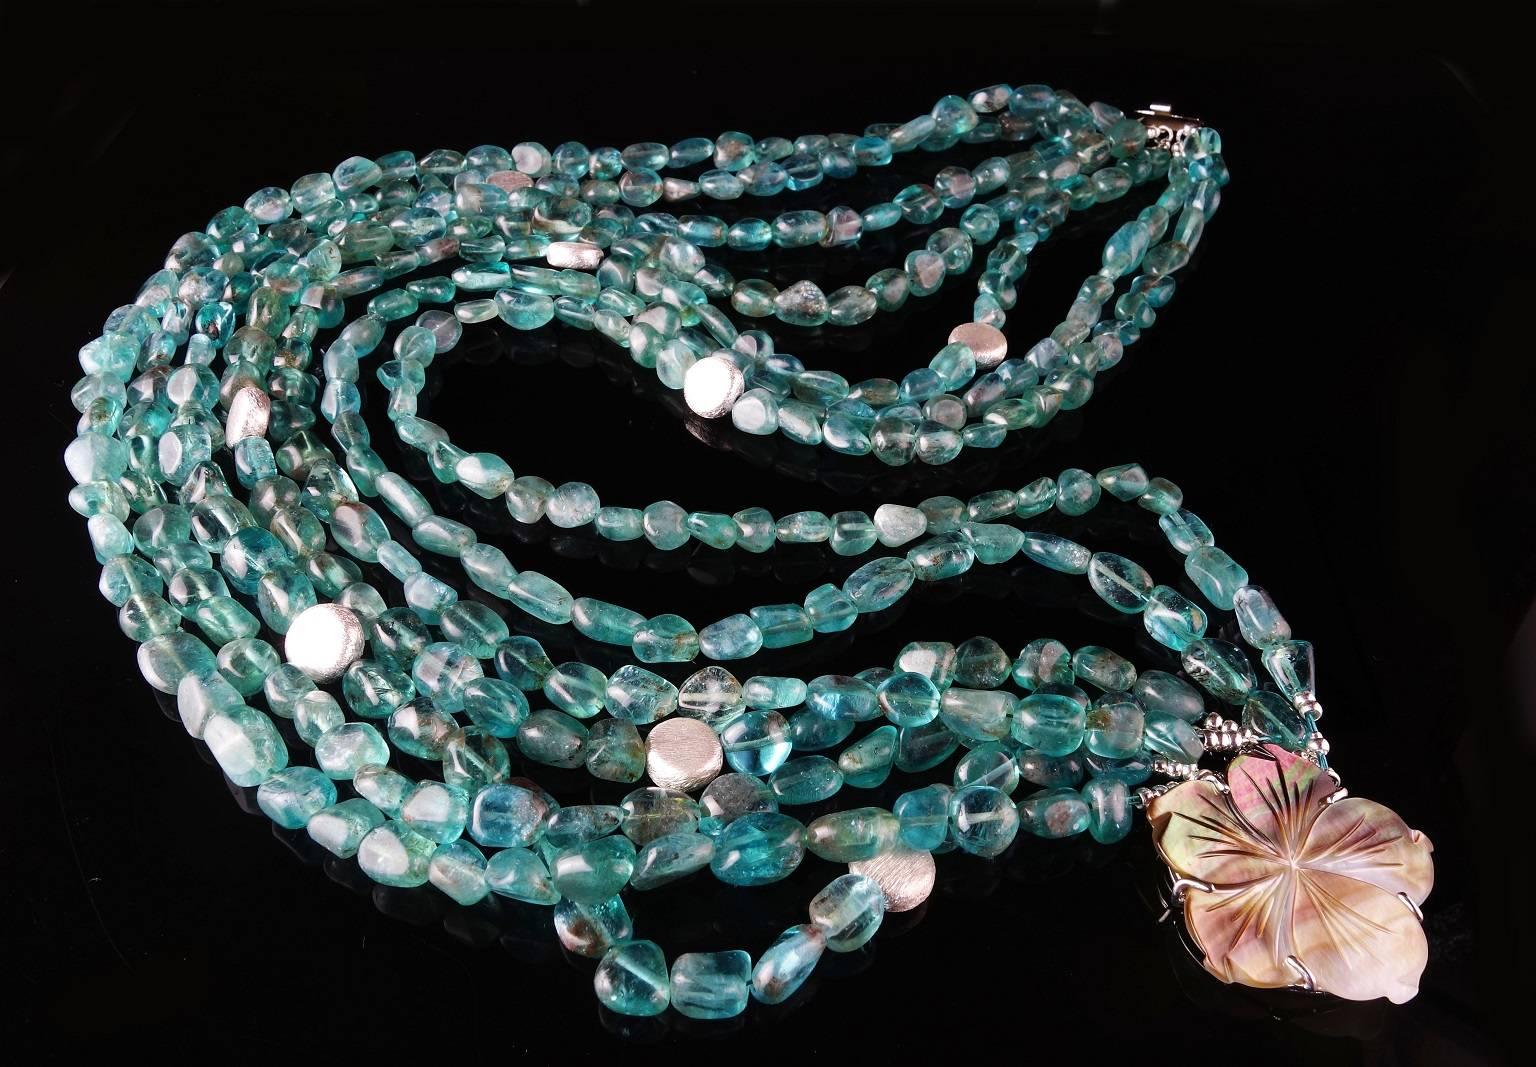 Custom made, seven strands of tumbled, polished transparent Apatite in a very wearable 18 inch necklace secured with a Mother of Pearl clasp. The Apatite strands are accented with the occasional silver tone disc. This unique necklace can be worn